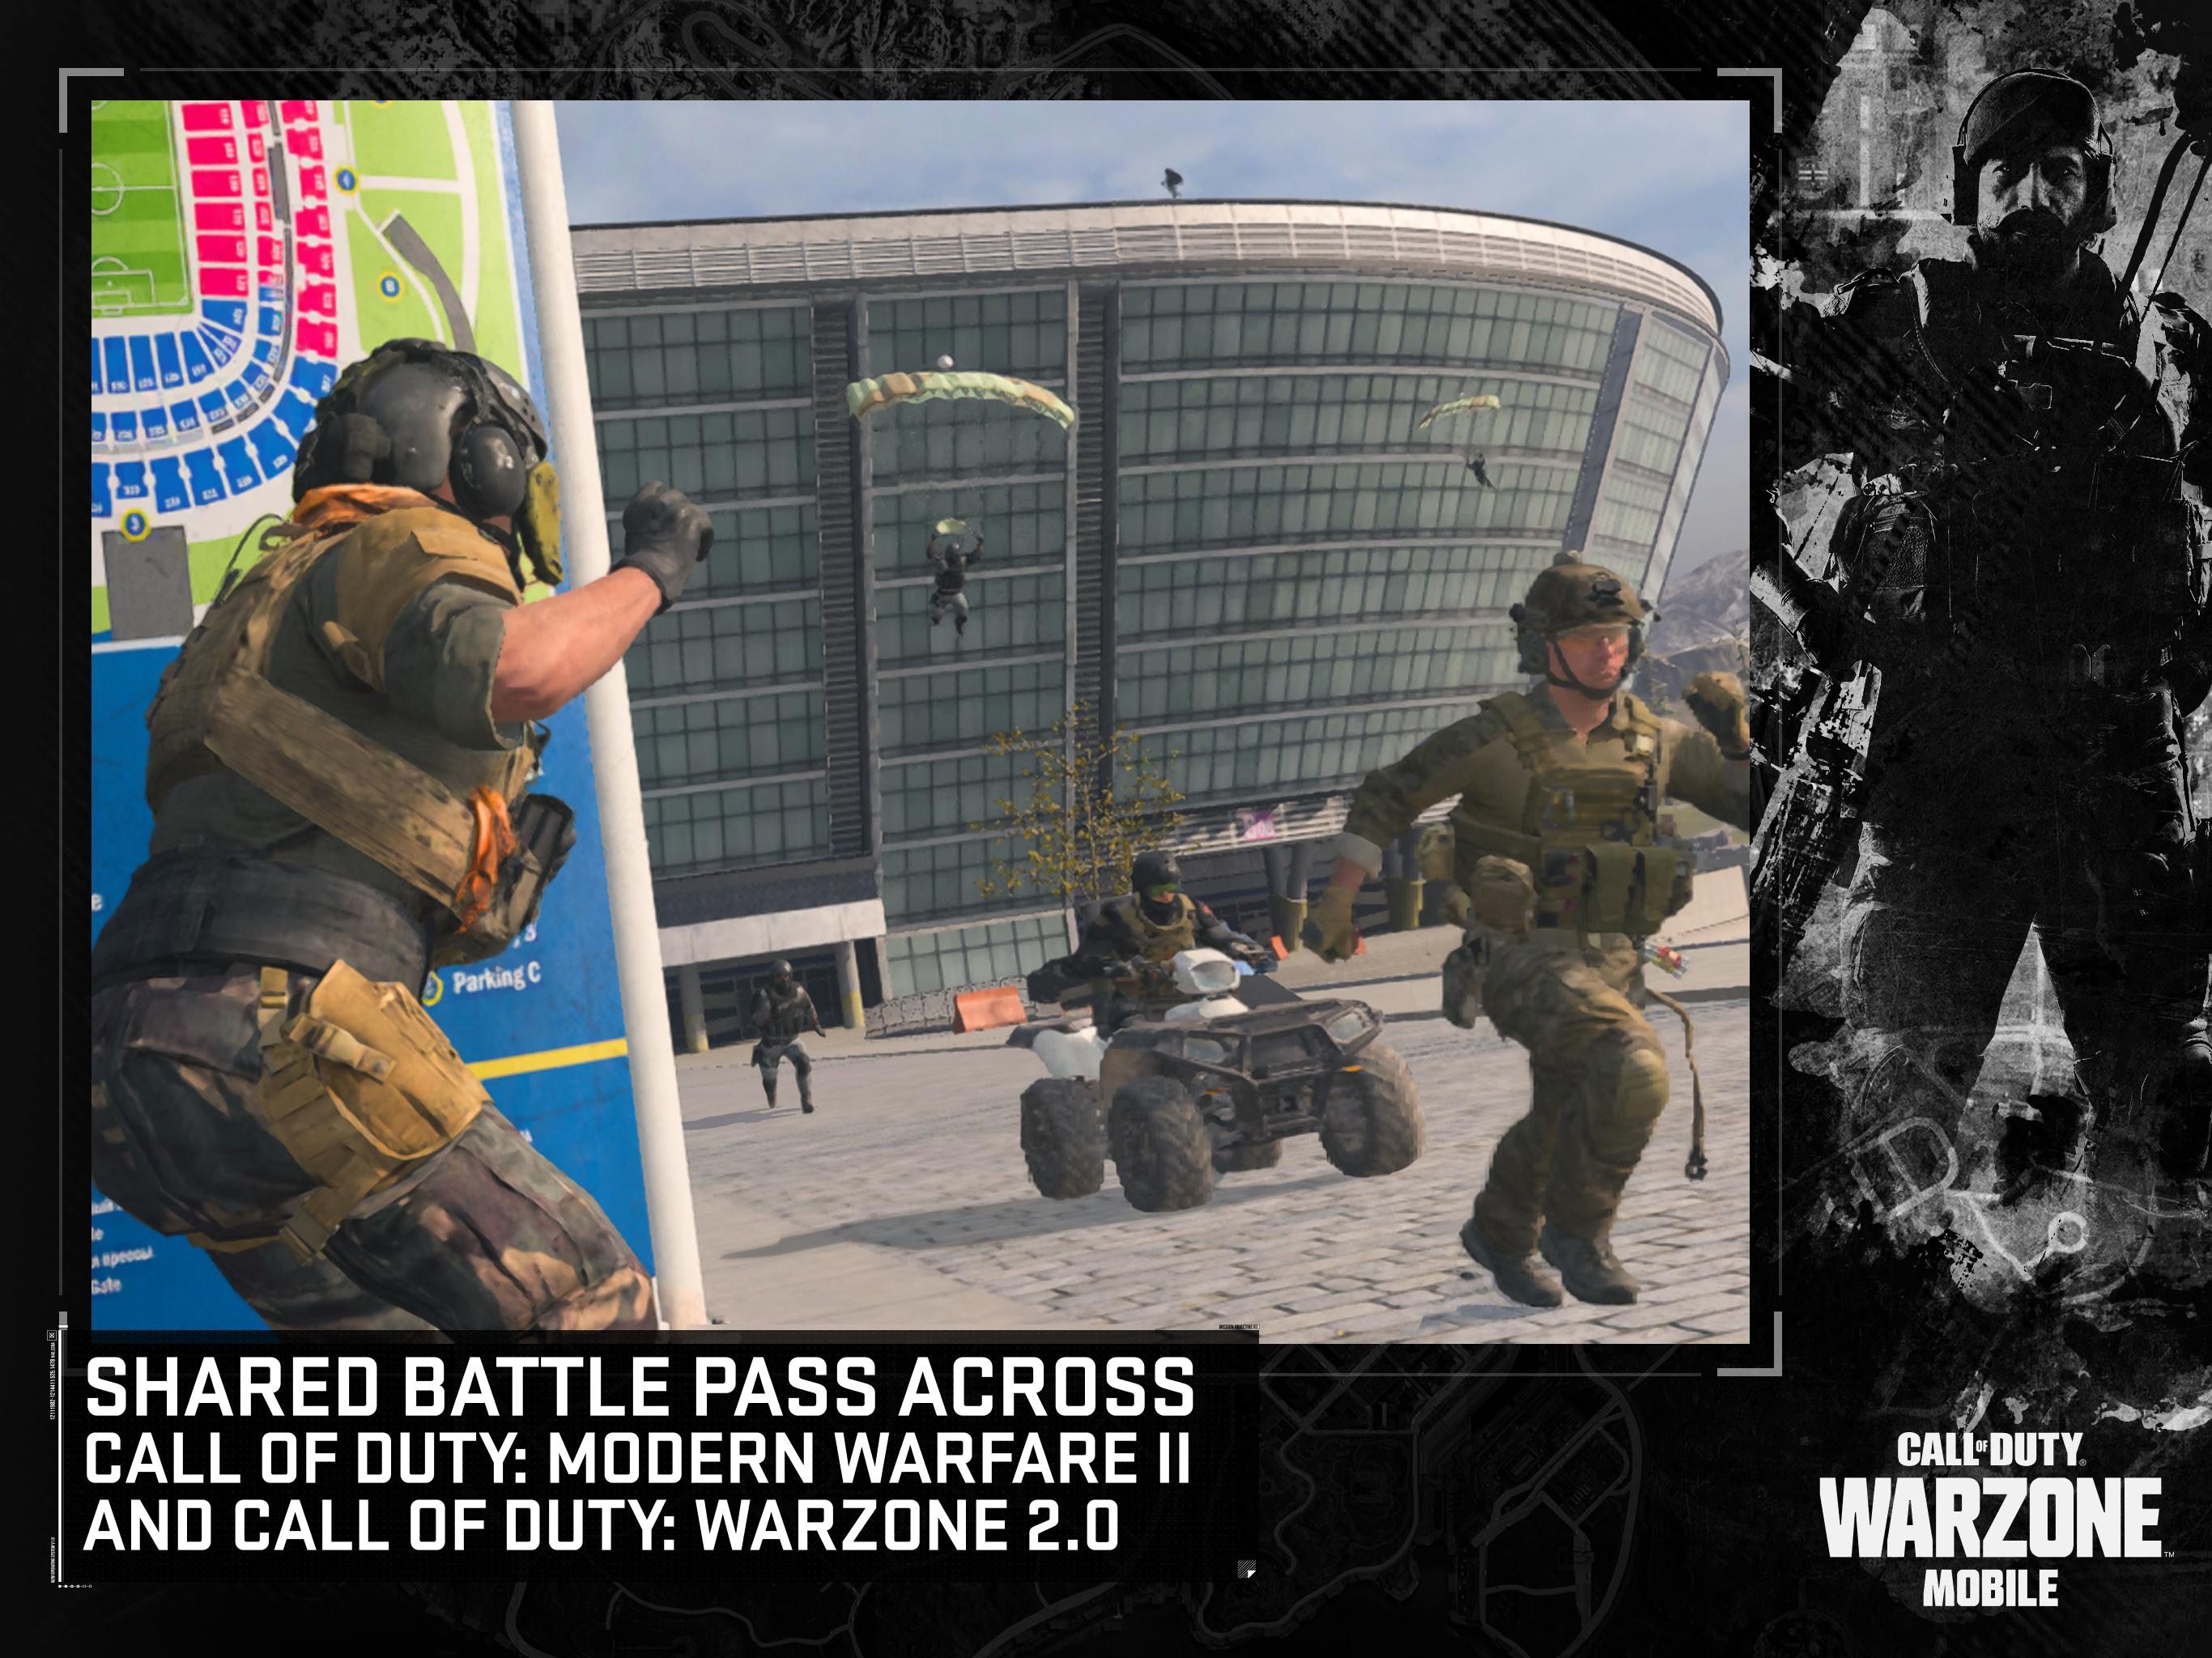 cod warzone mobile beta download apk in 2023  Call of duty, Battle royale  game, Game design